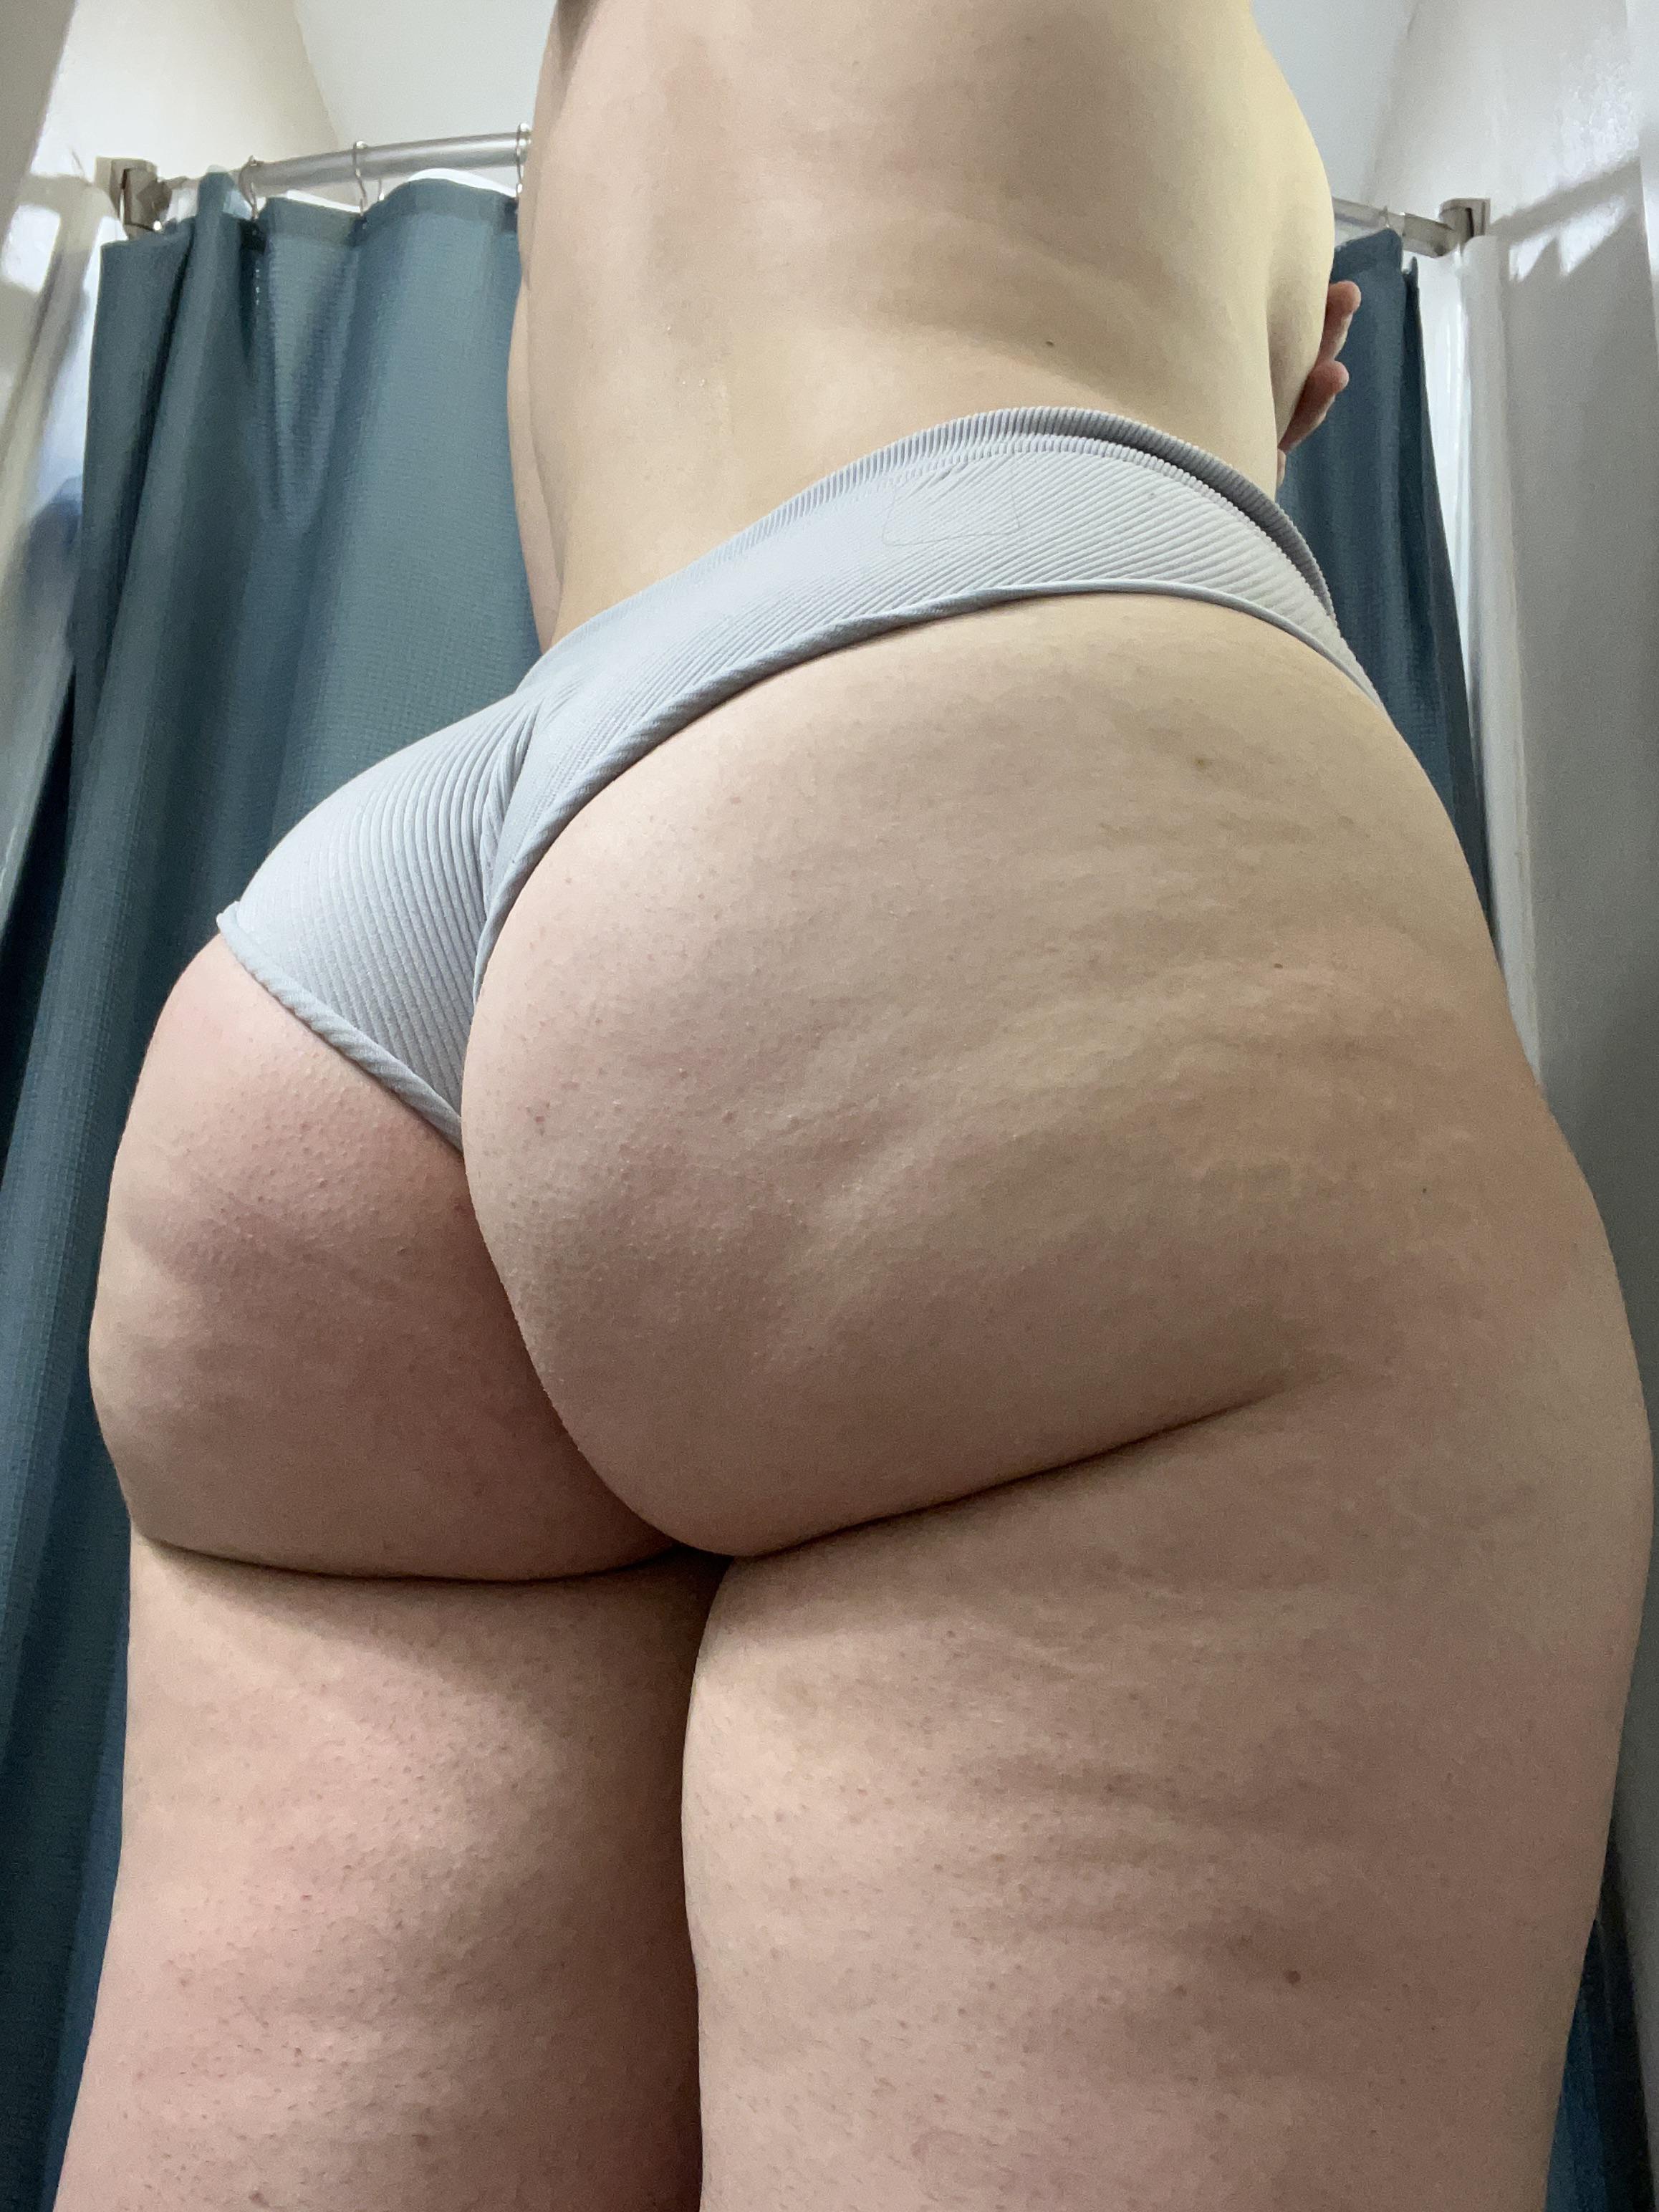 PAWG Snack time